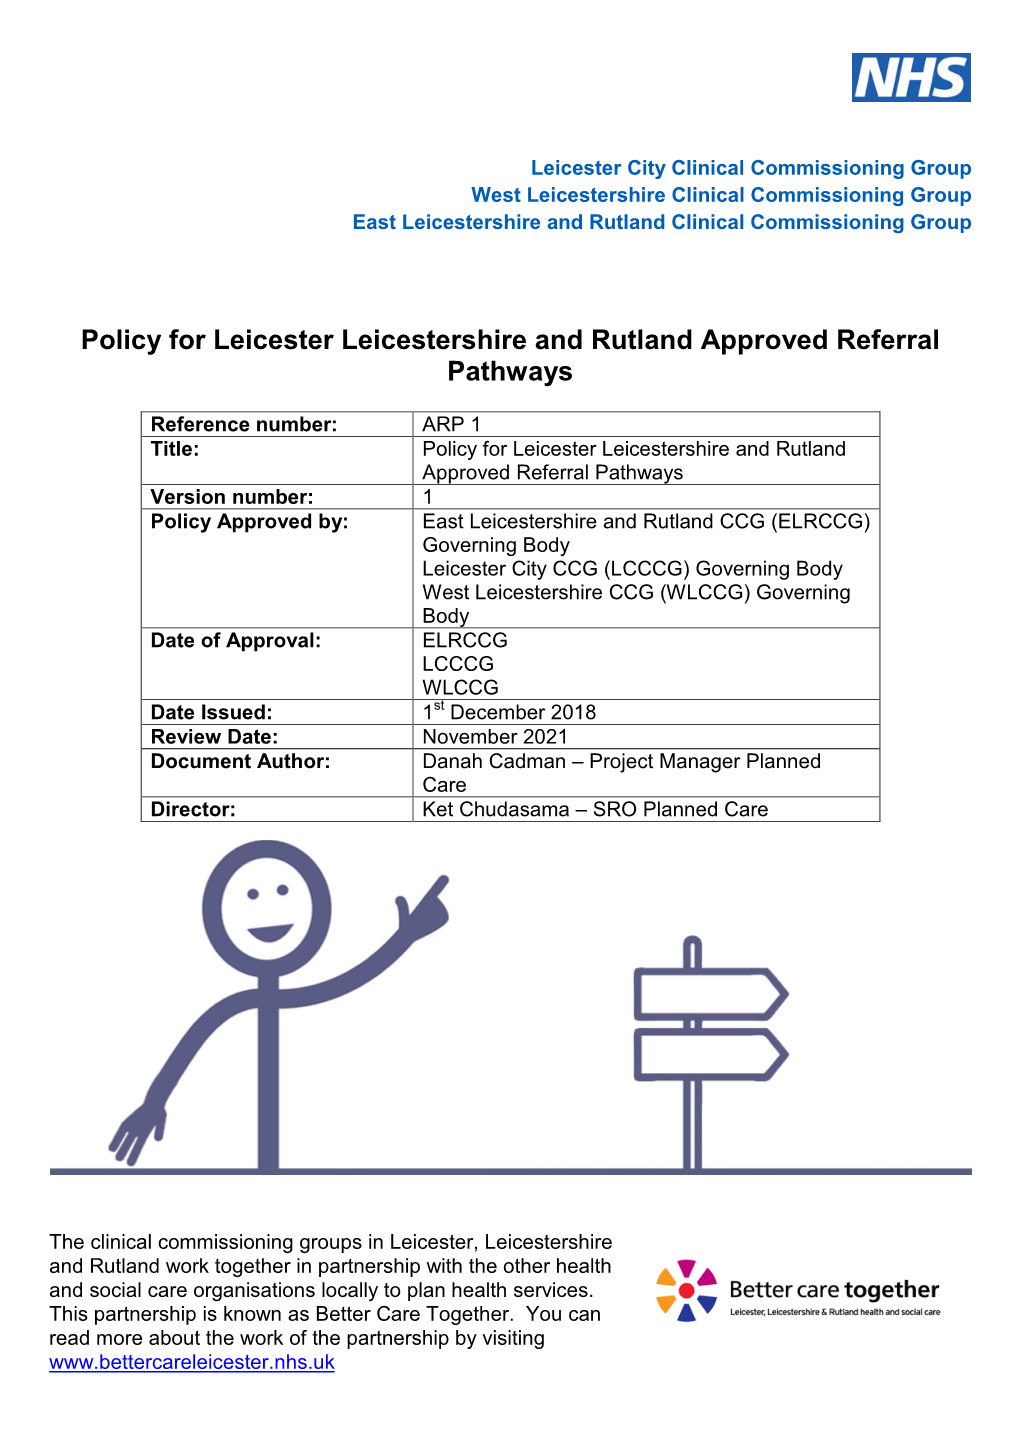 Policy for Leicester Leicestershire and Rutland Approved Referral Pathways